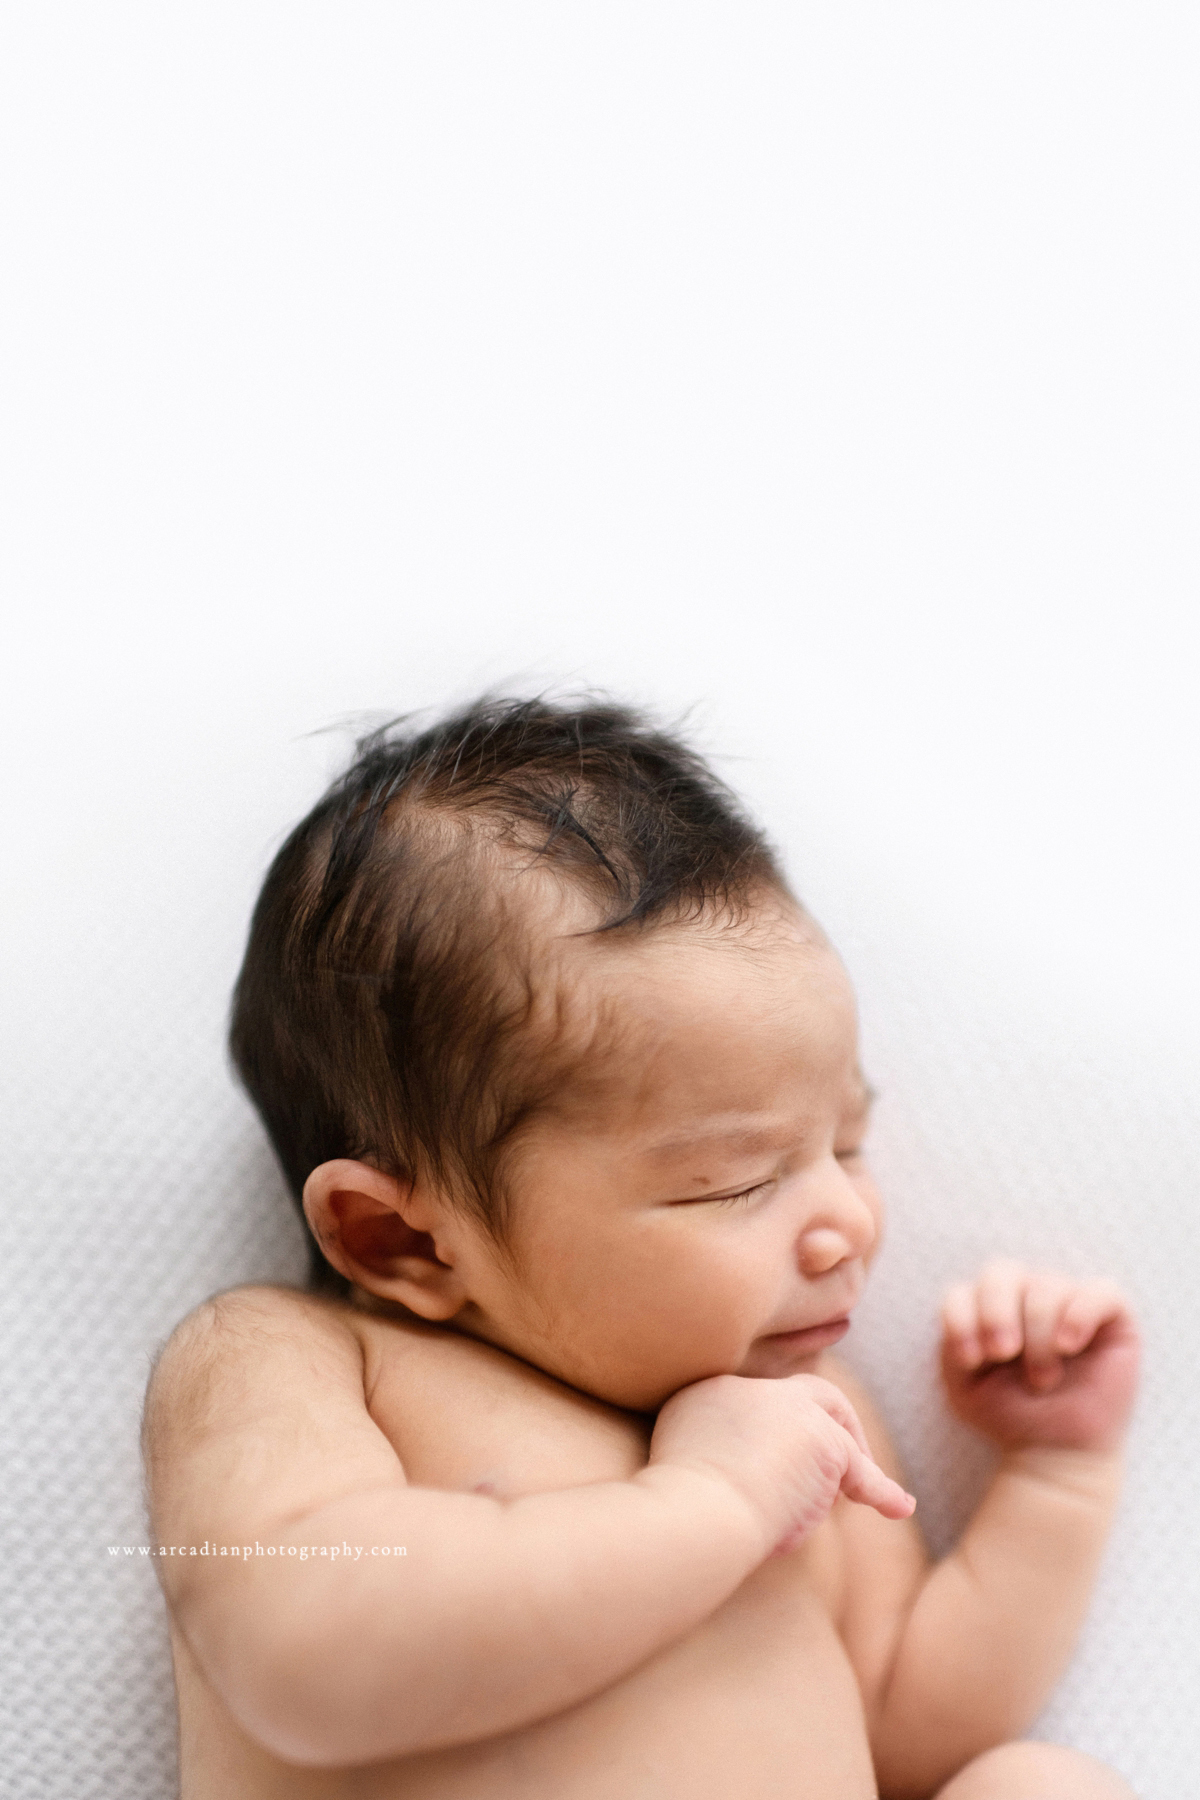 Learn more about booking newborn photos.